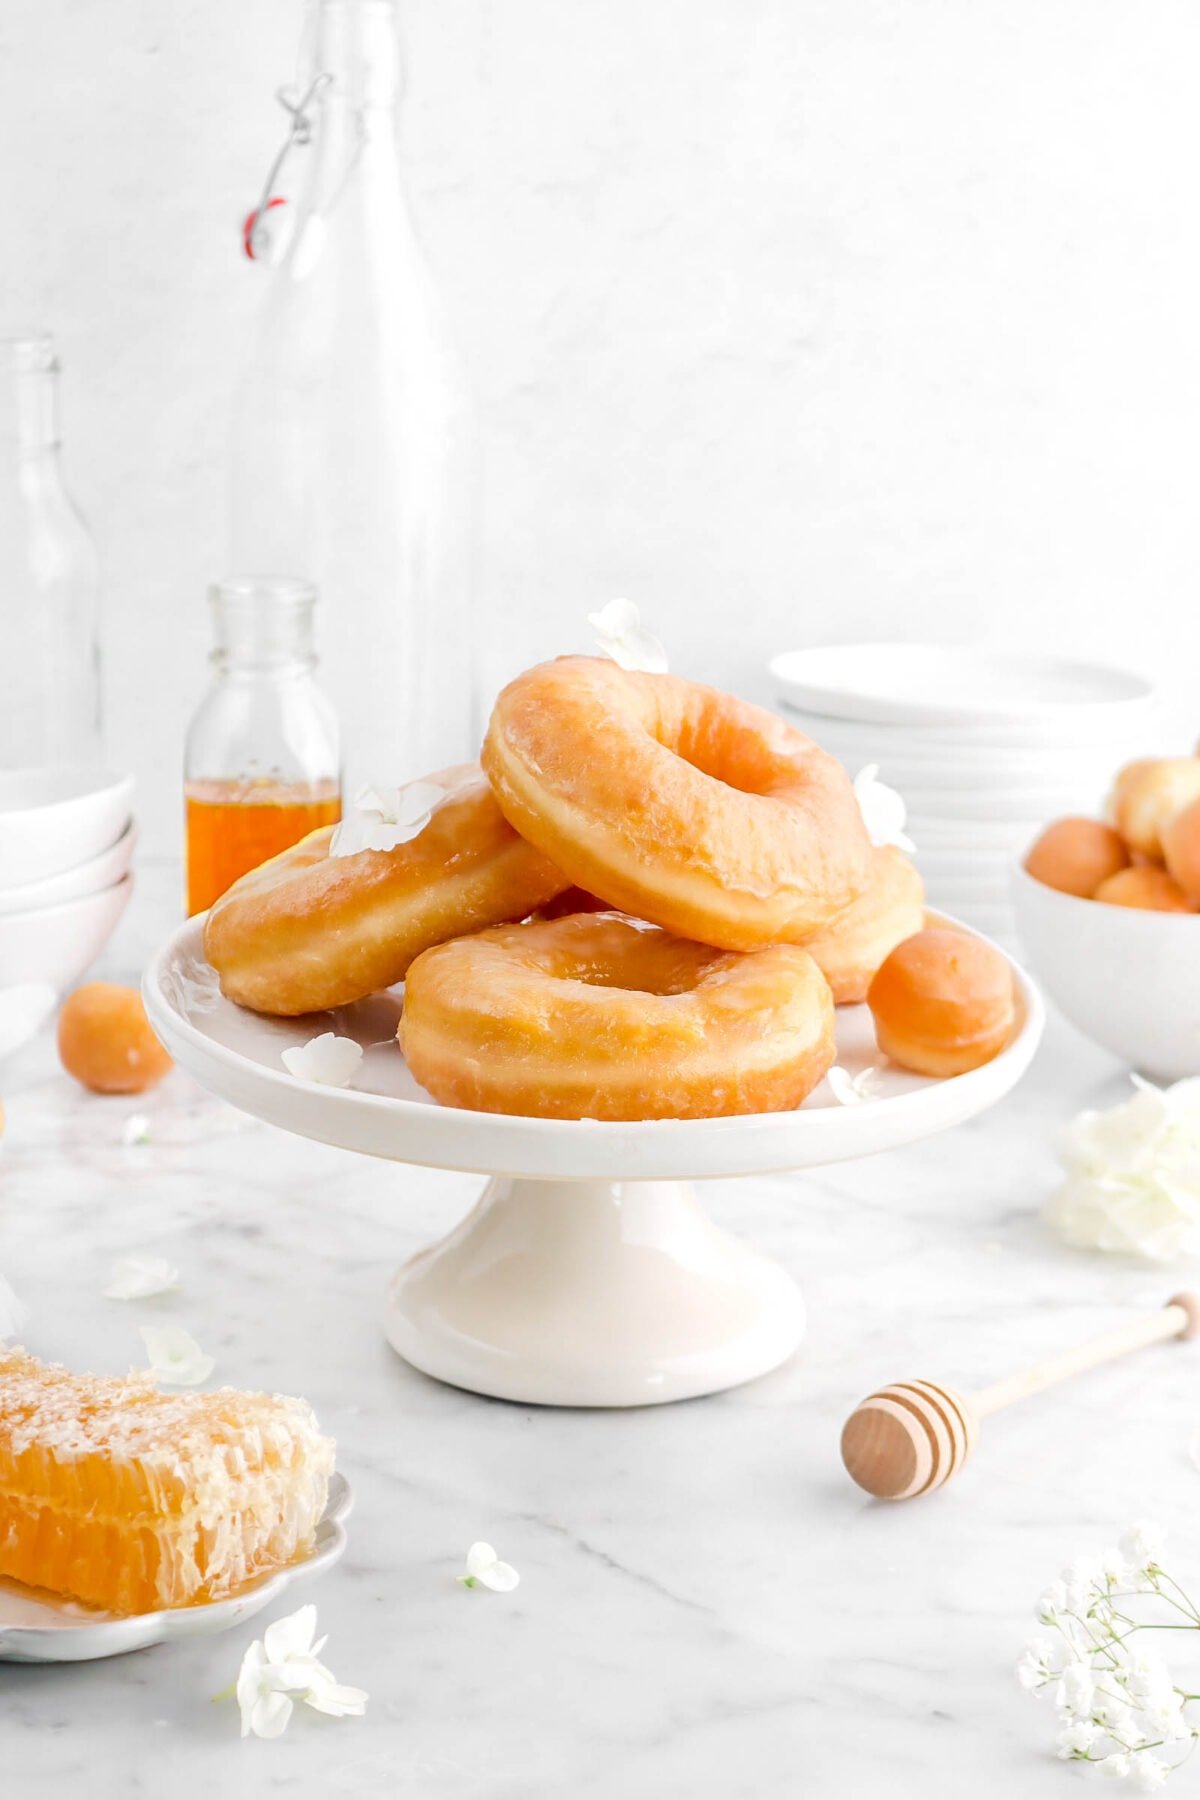 stack of honey doughnuts on cake plate with honeycomb and wooden honey dipper beside, white flowers and stack of plates behind